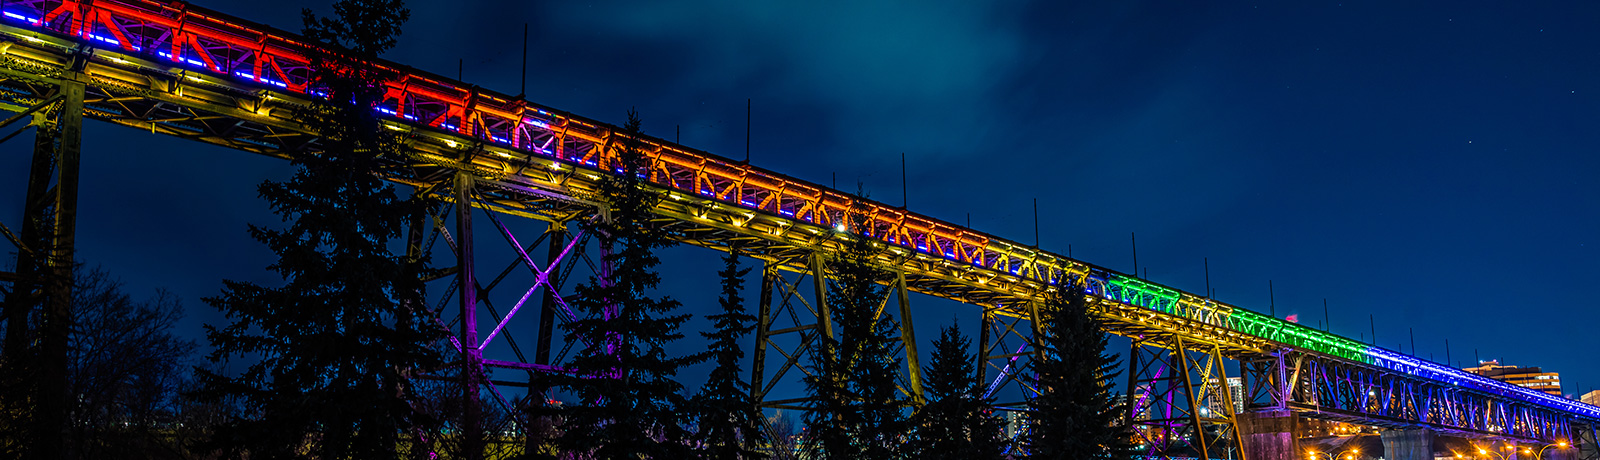 bridge lit up with pride colors at night